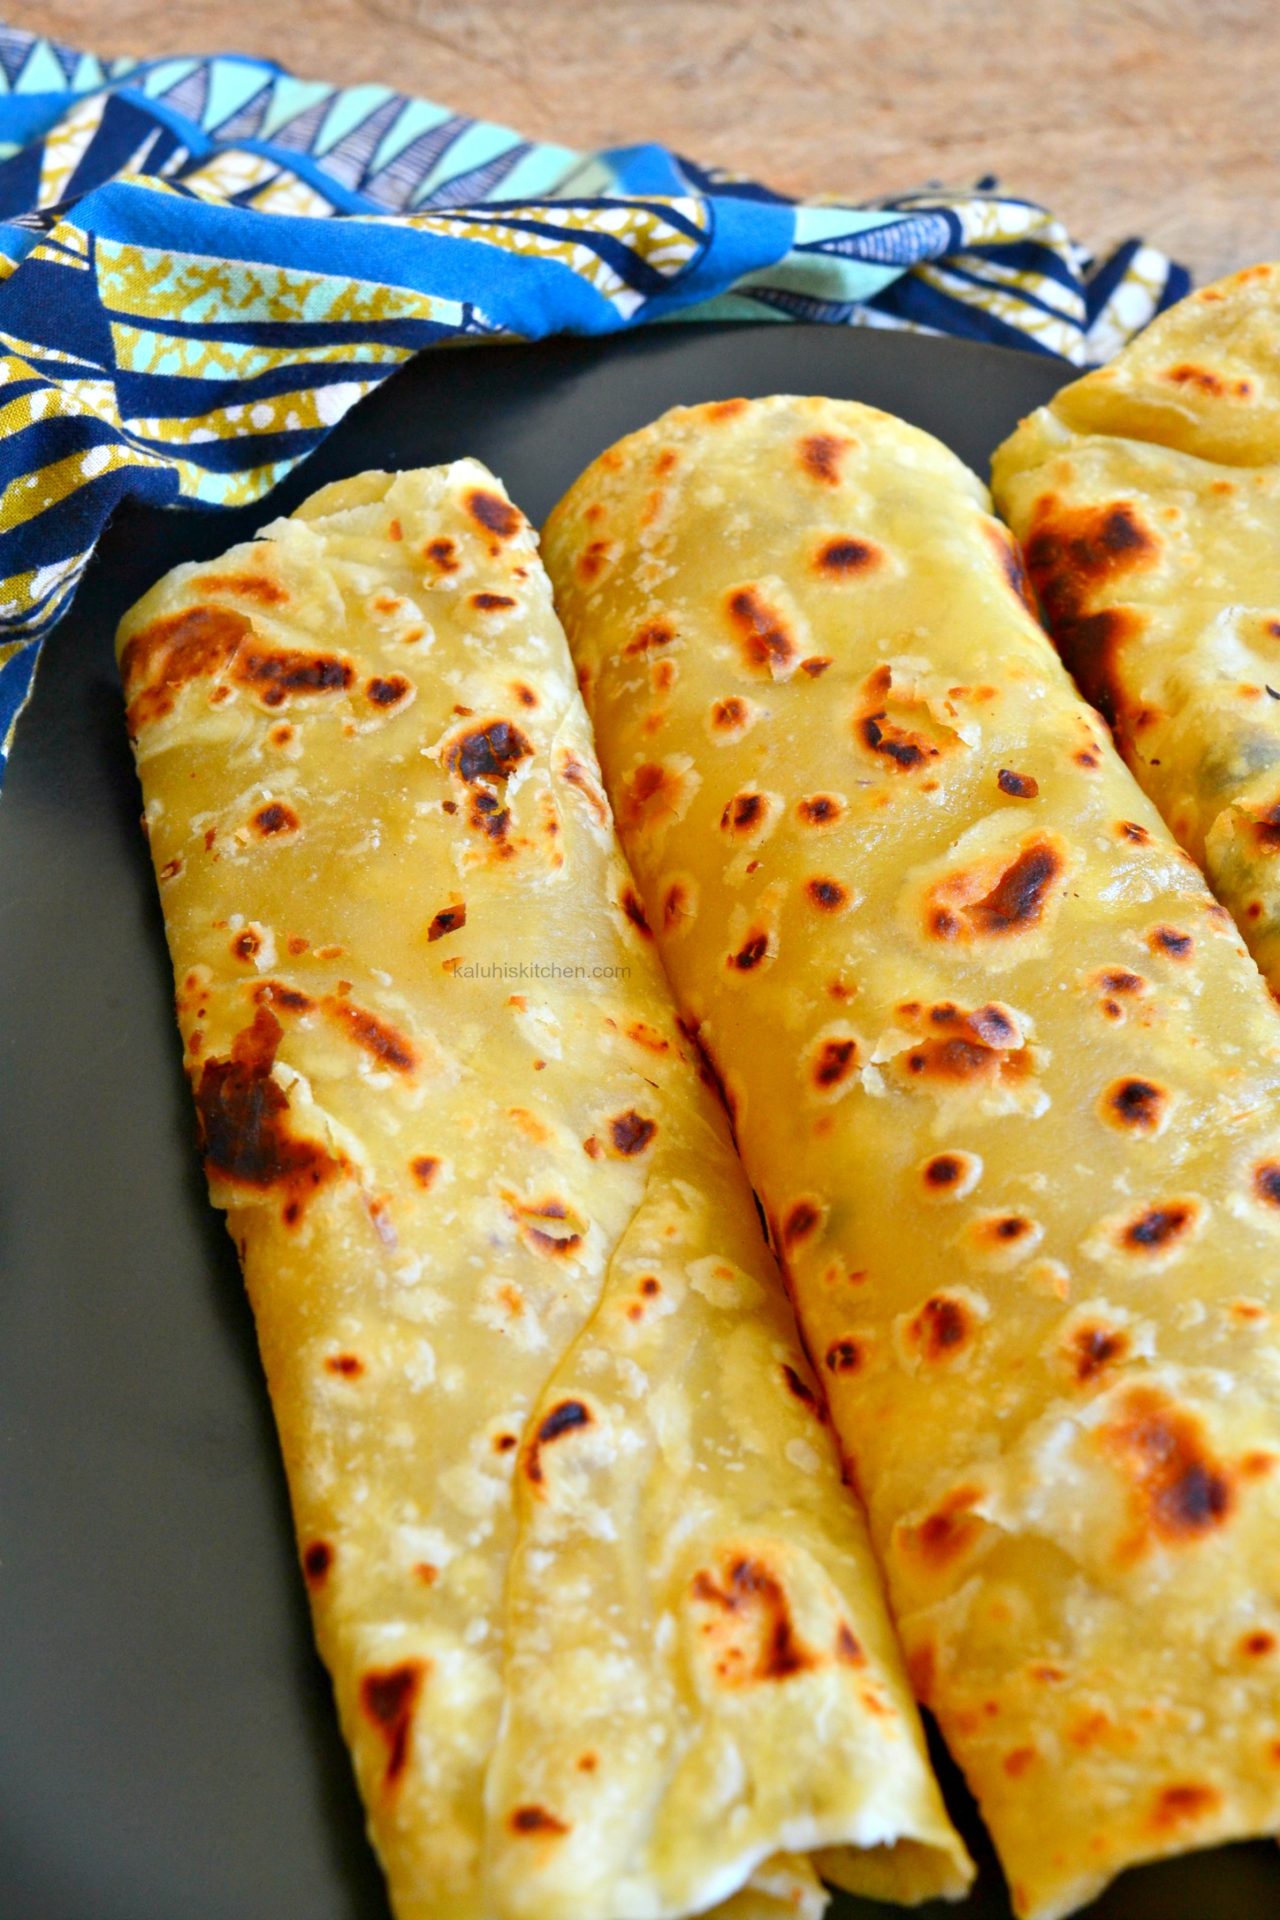 red onion and ghee chapati_how to make chapati_how to cook with ghee_kenyan food blogs_kenyan food bloggers_kaluhiskitchen.com